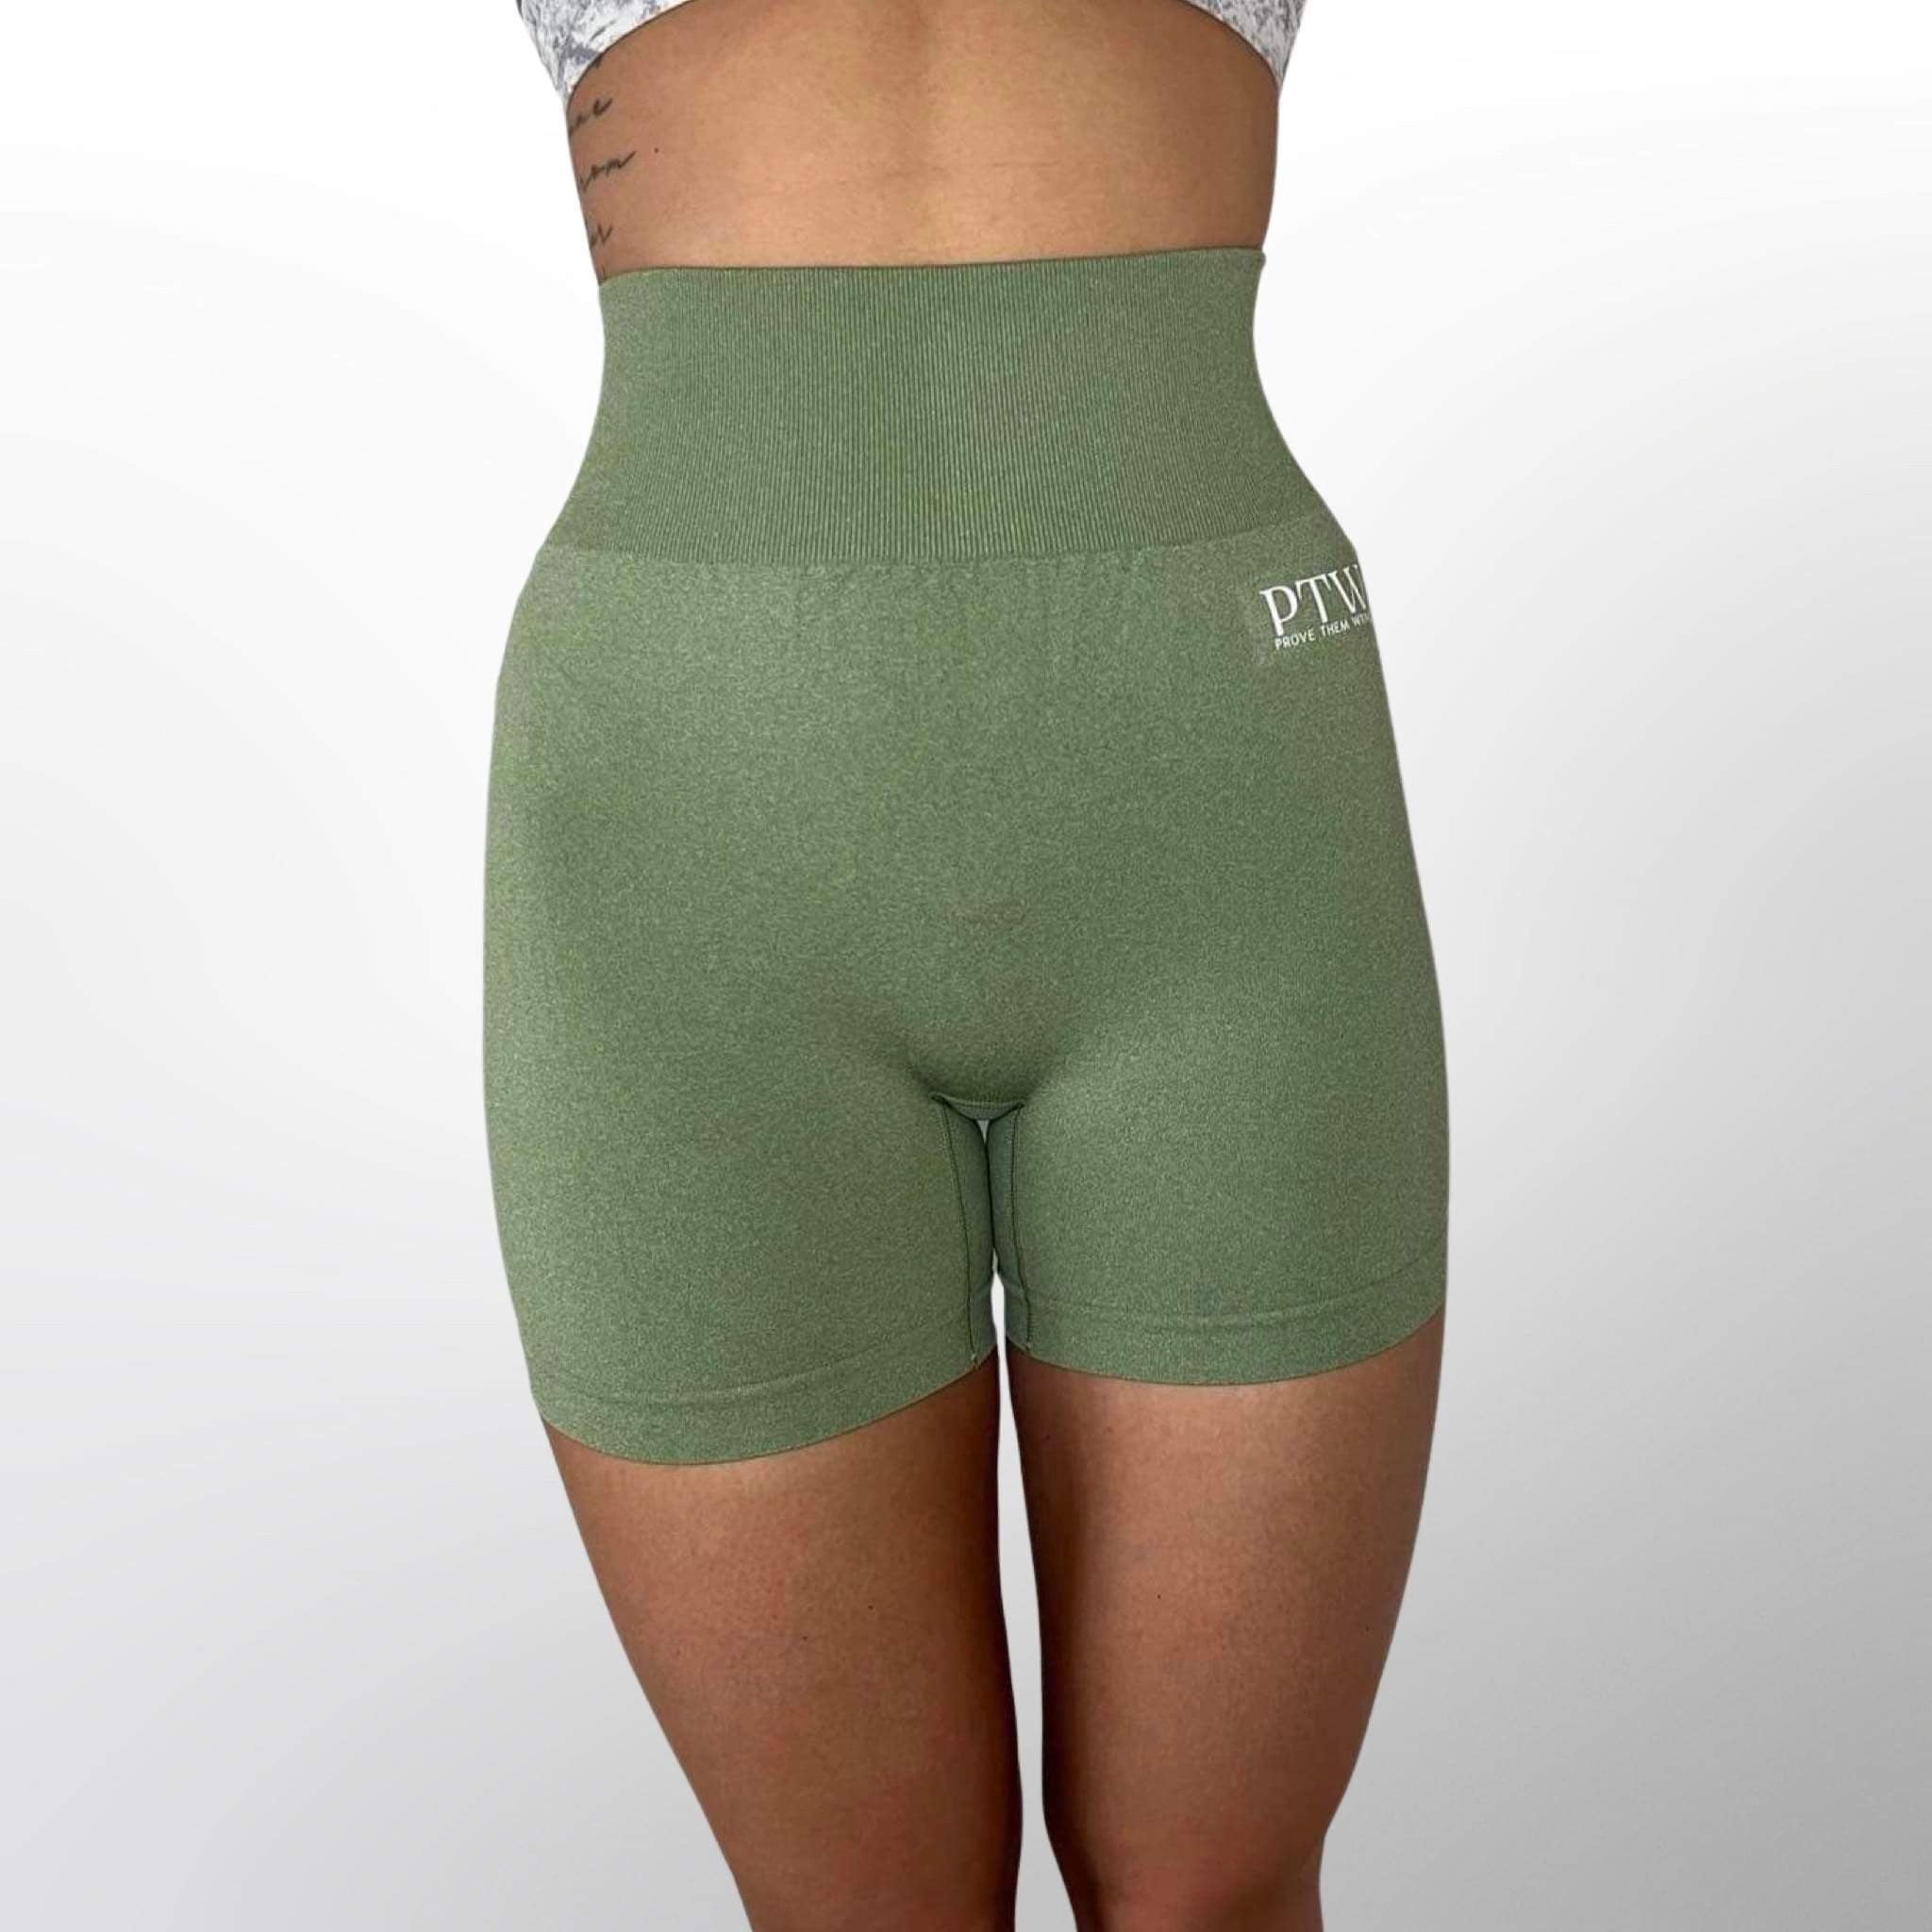 Fit Seamless shorts